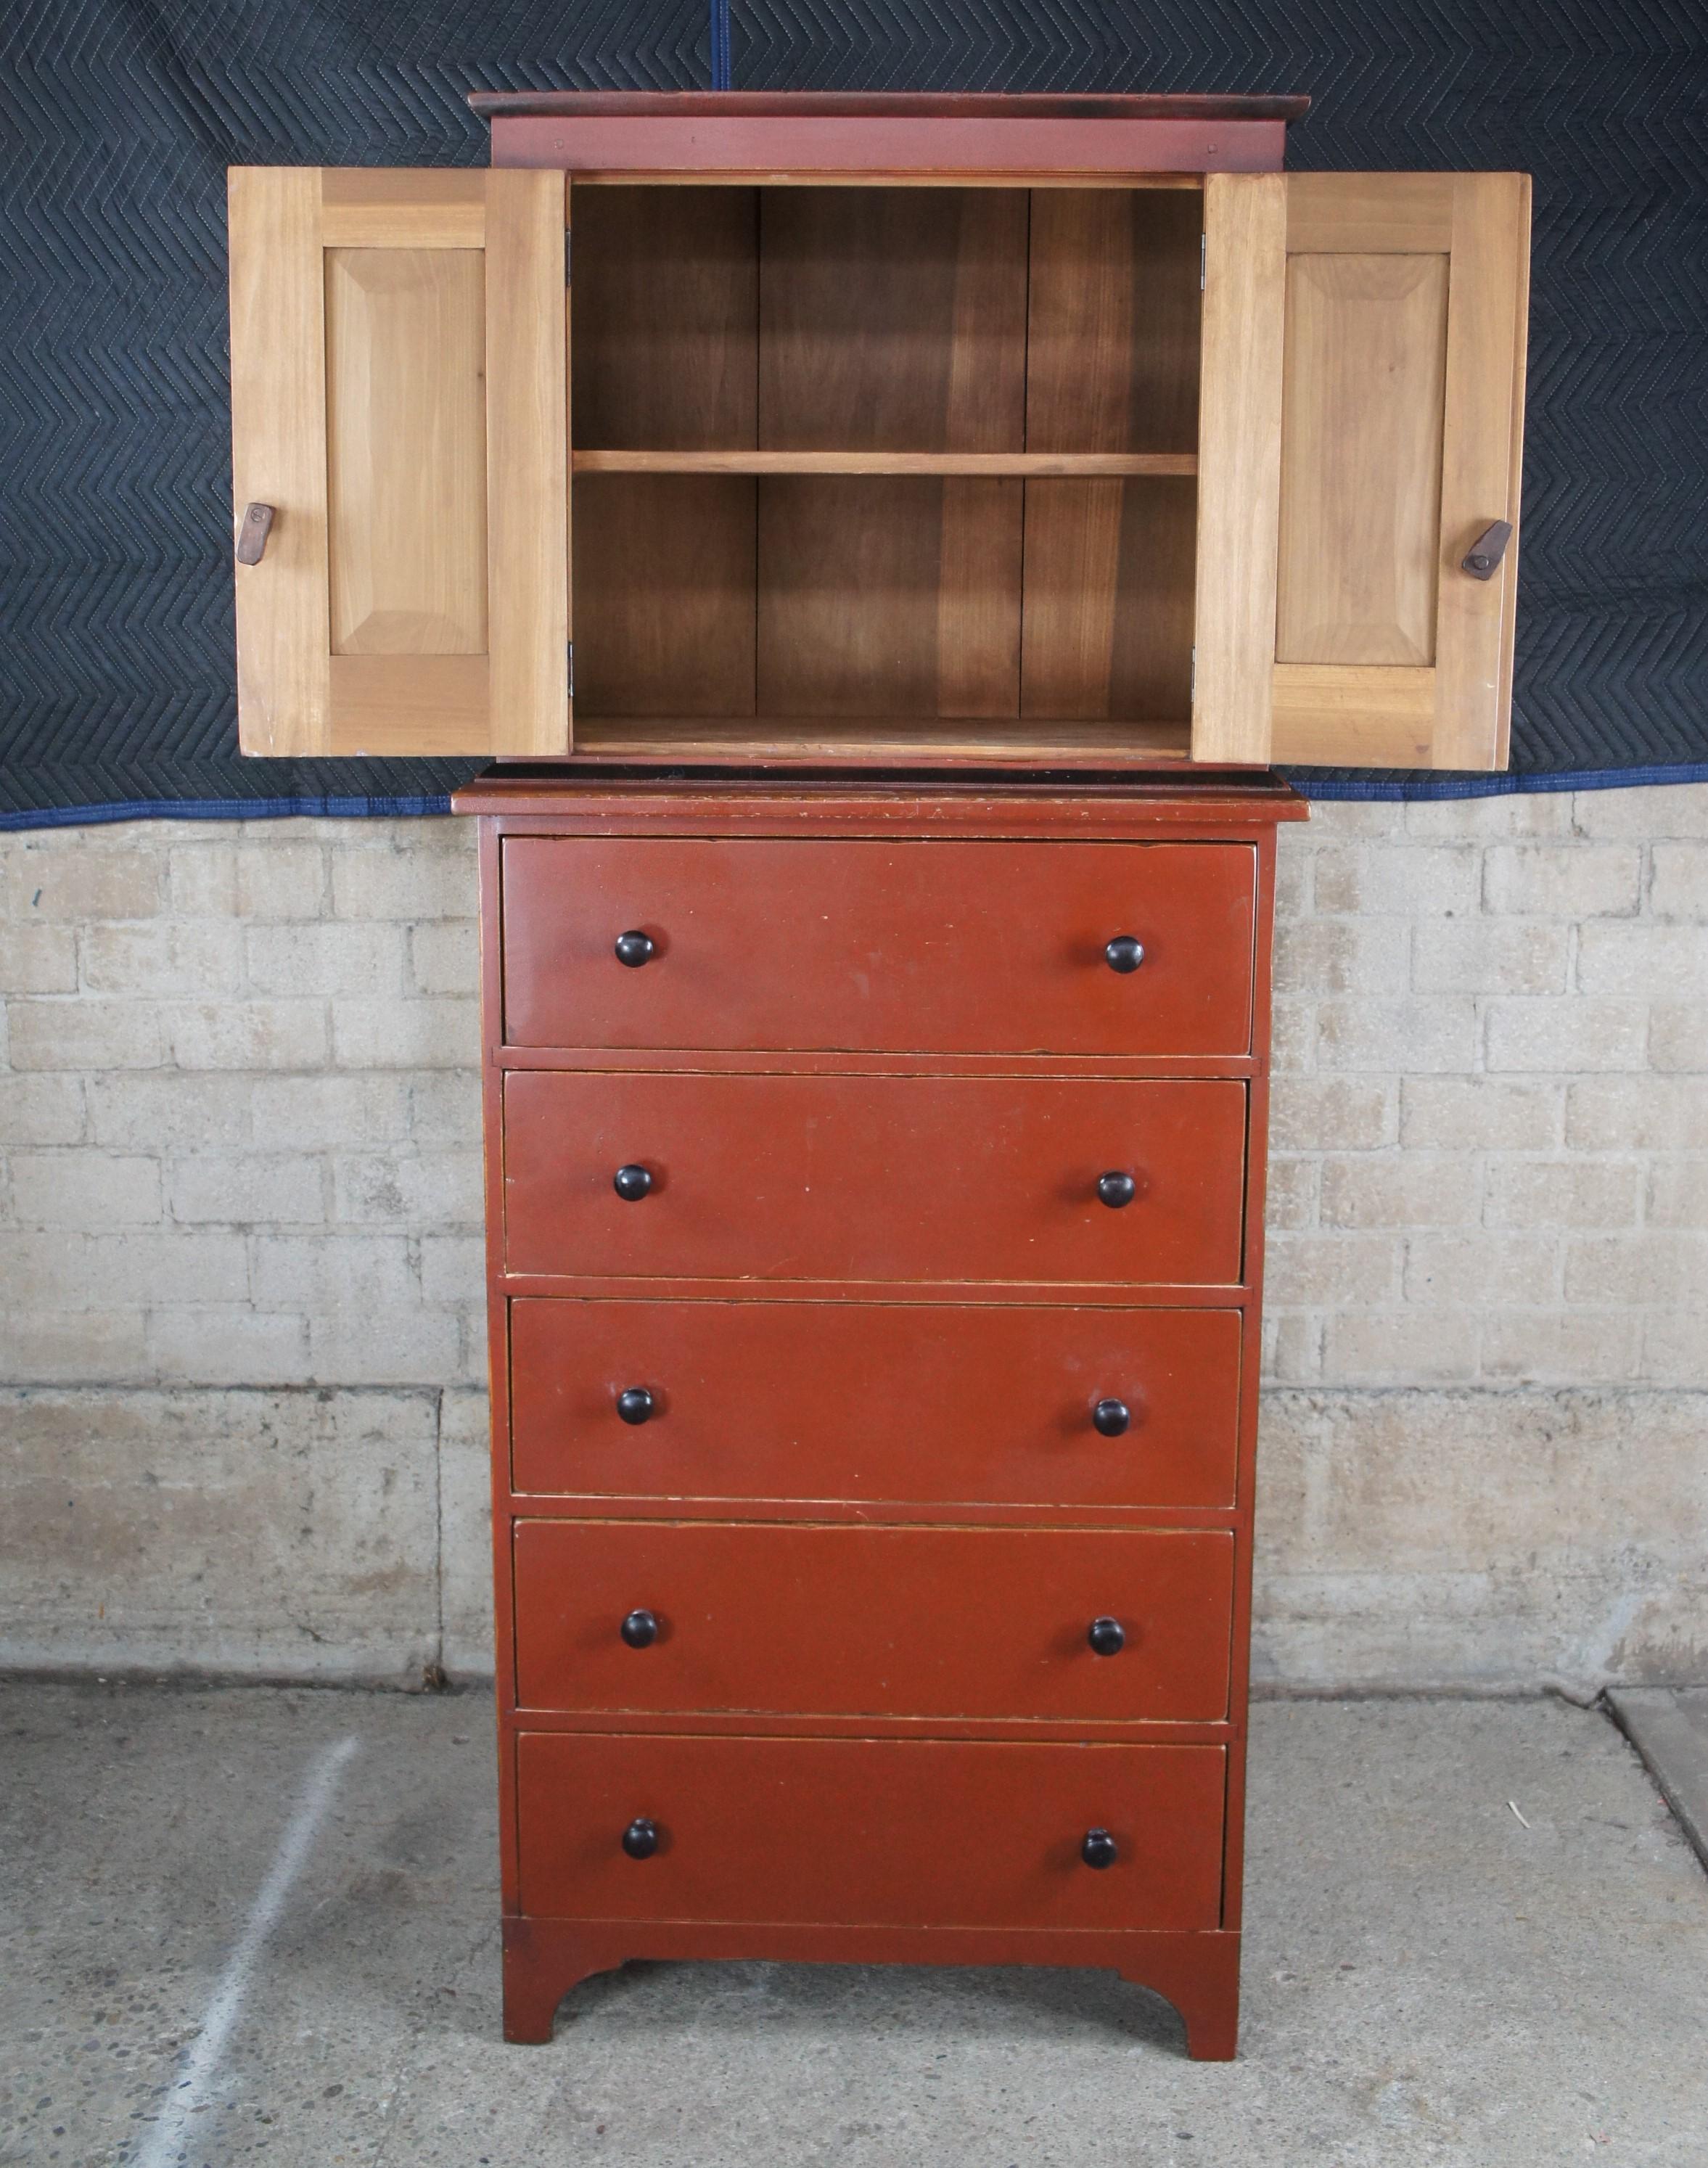 American Colonial David T Smith Early American Painted Poplar Red Chest Drawers Dresser Wardrobe